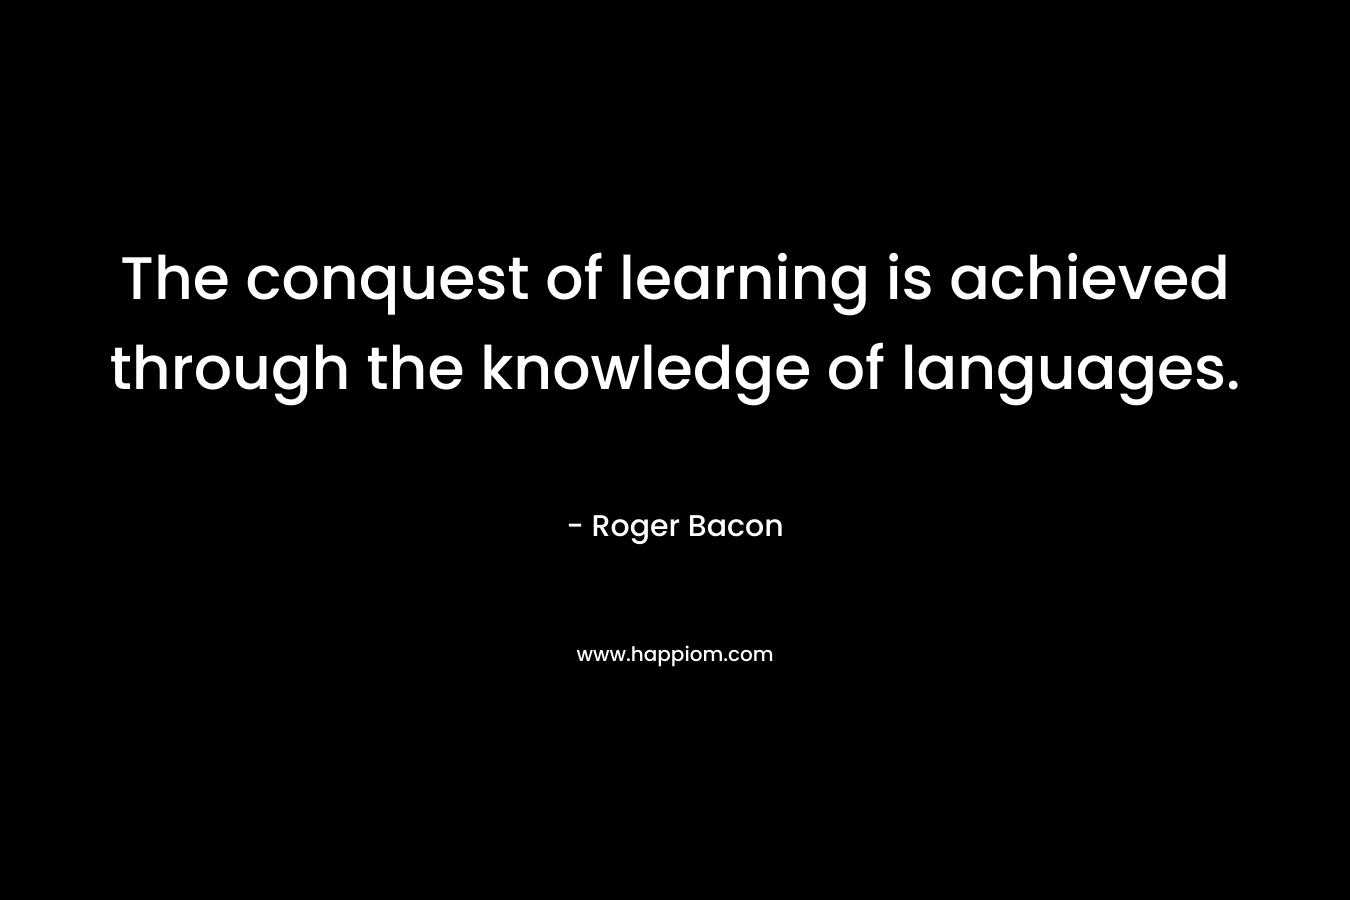 The conquest of learning is achieved through the knowledge of languages. – Roger Bacon